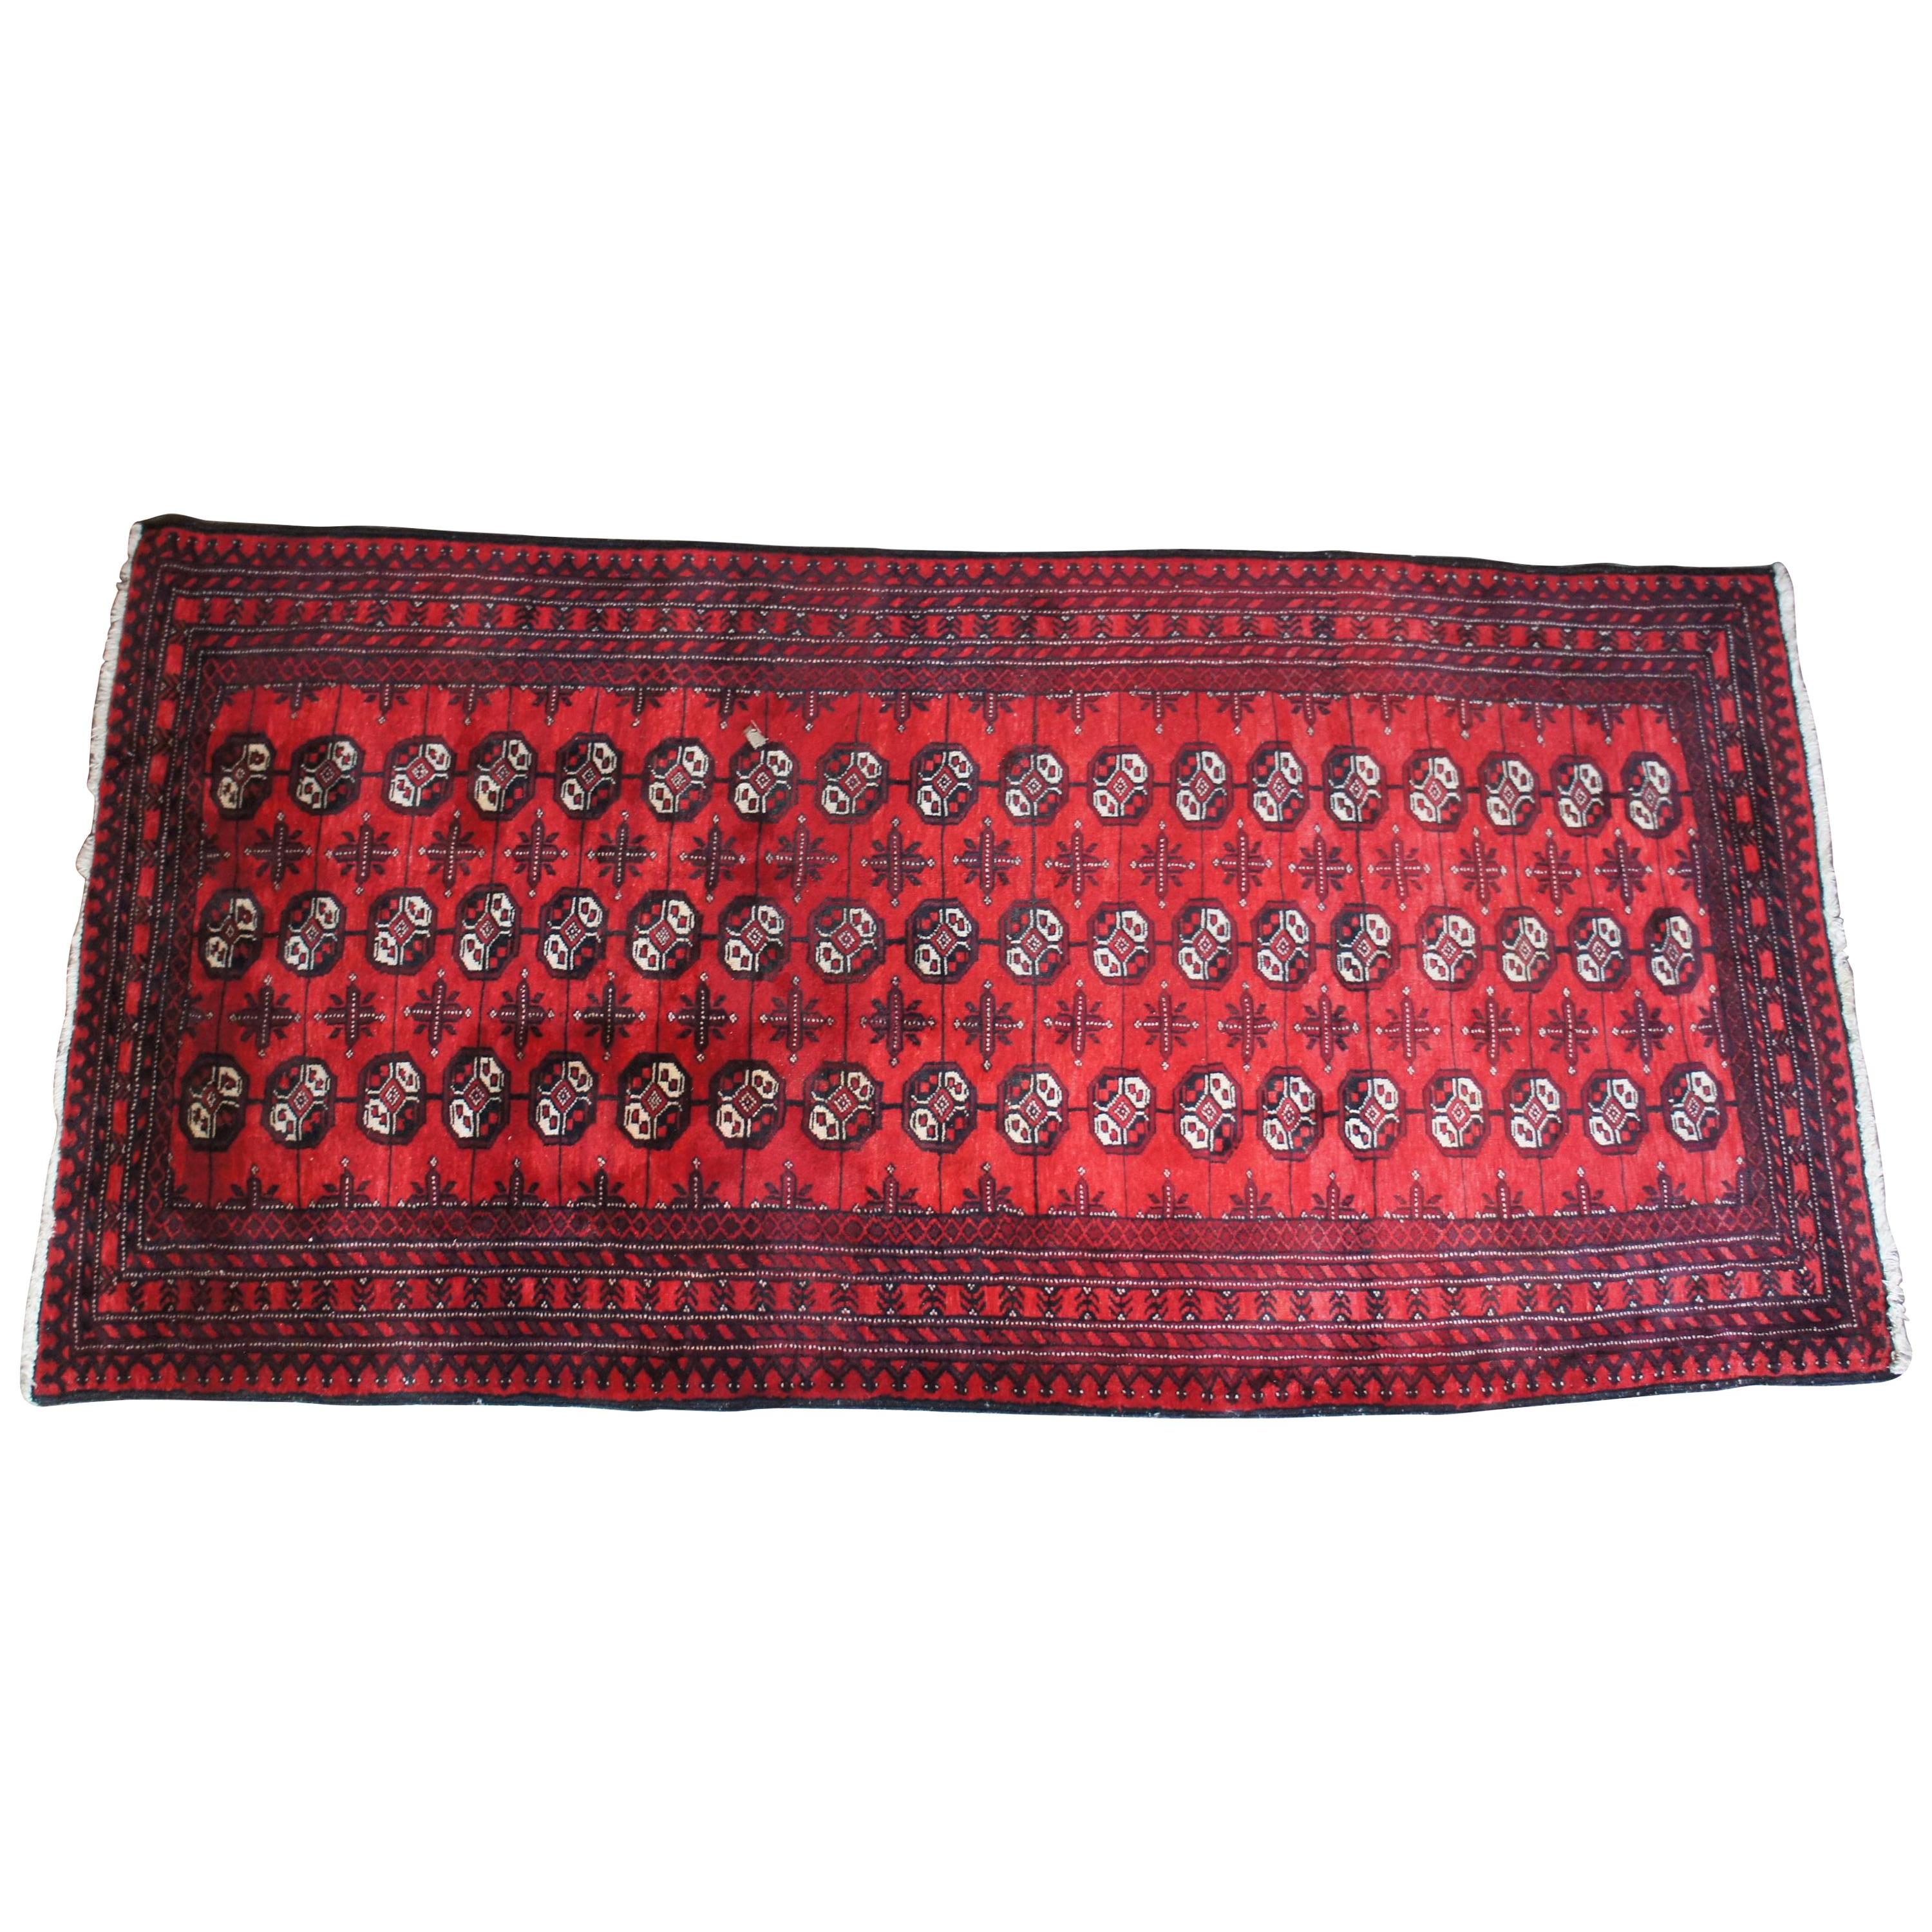 Vintage Persian hand knotted Royal Bokhara geometric wool and silk area rug, carpet or runner. Features a field of red with blacks and tans.
 